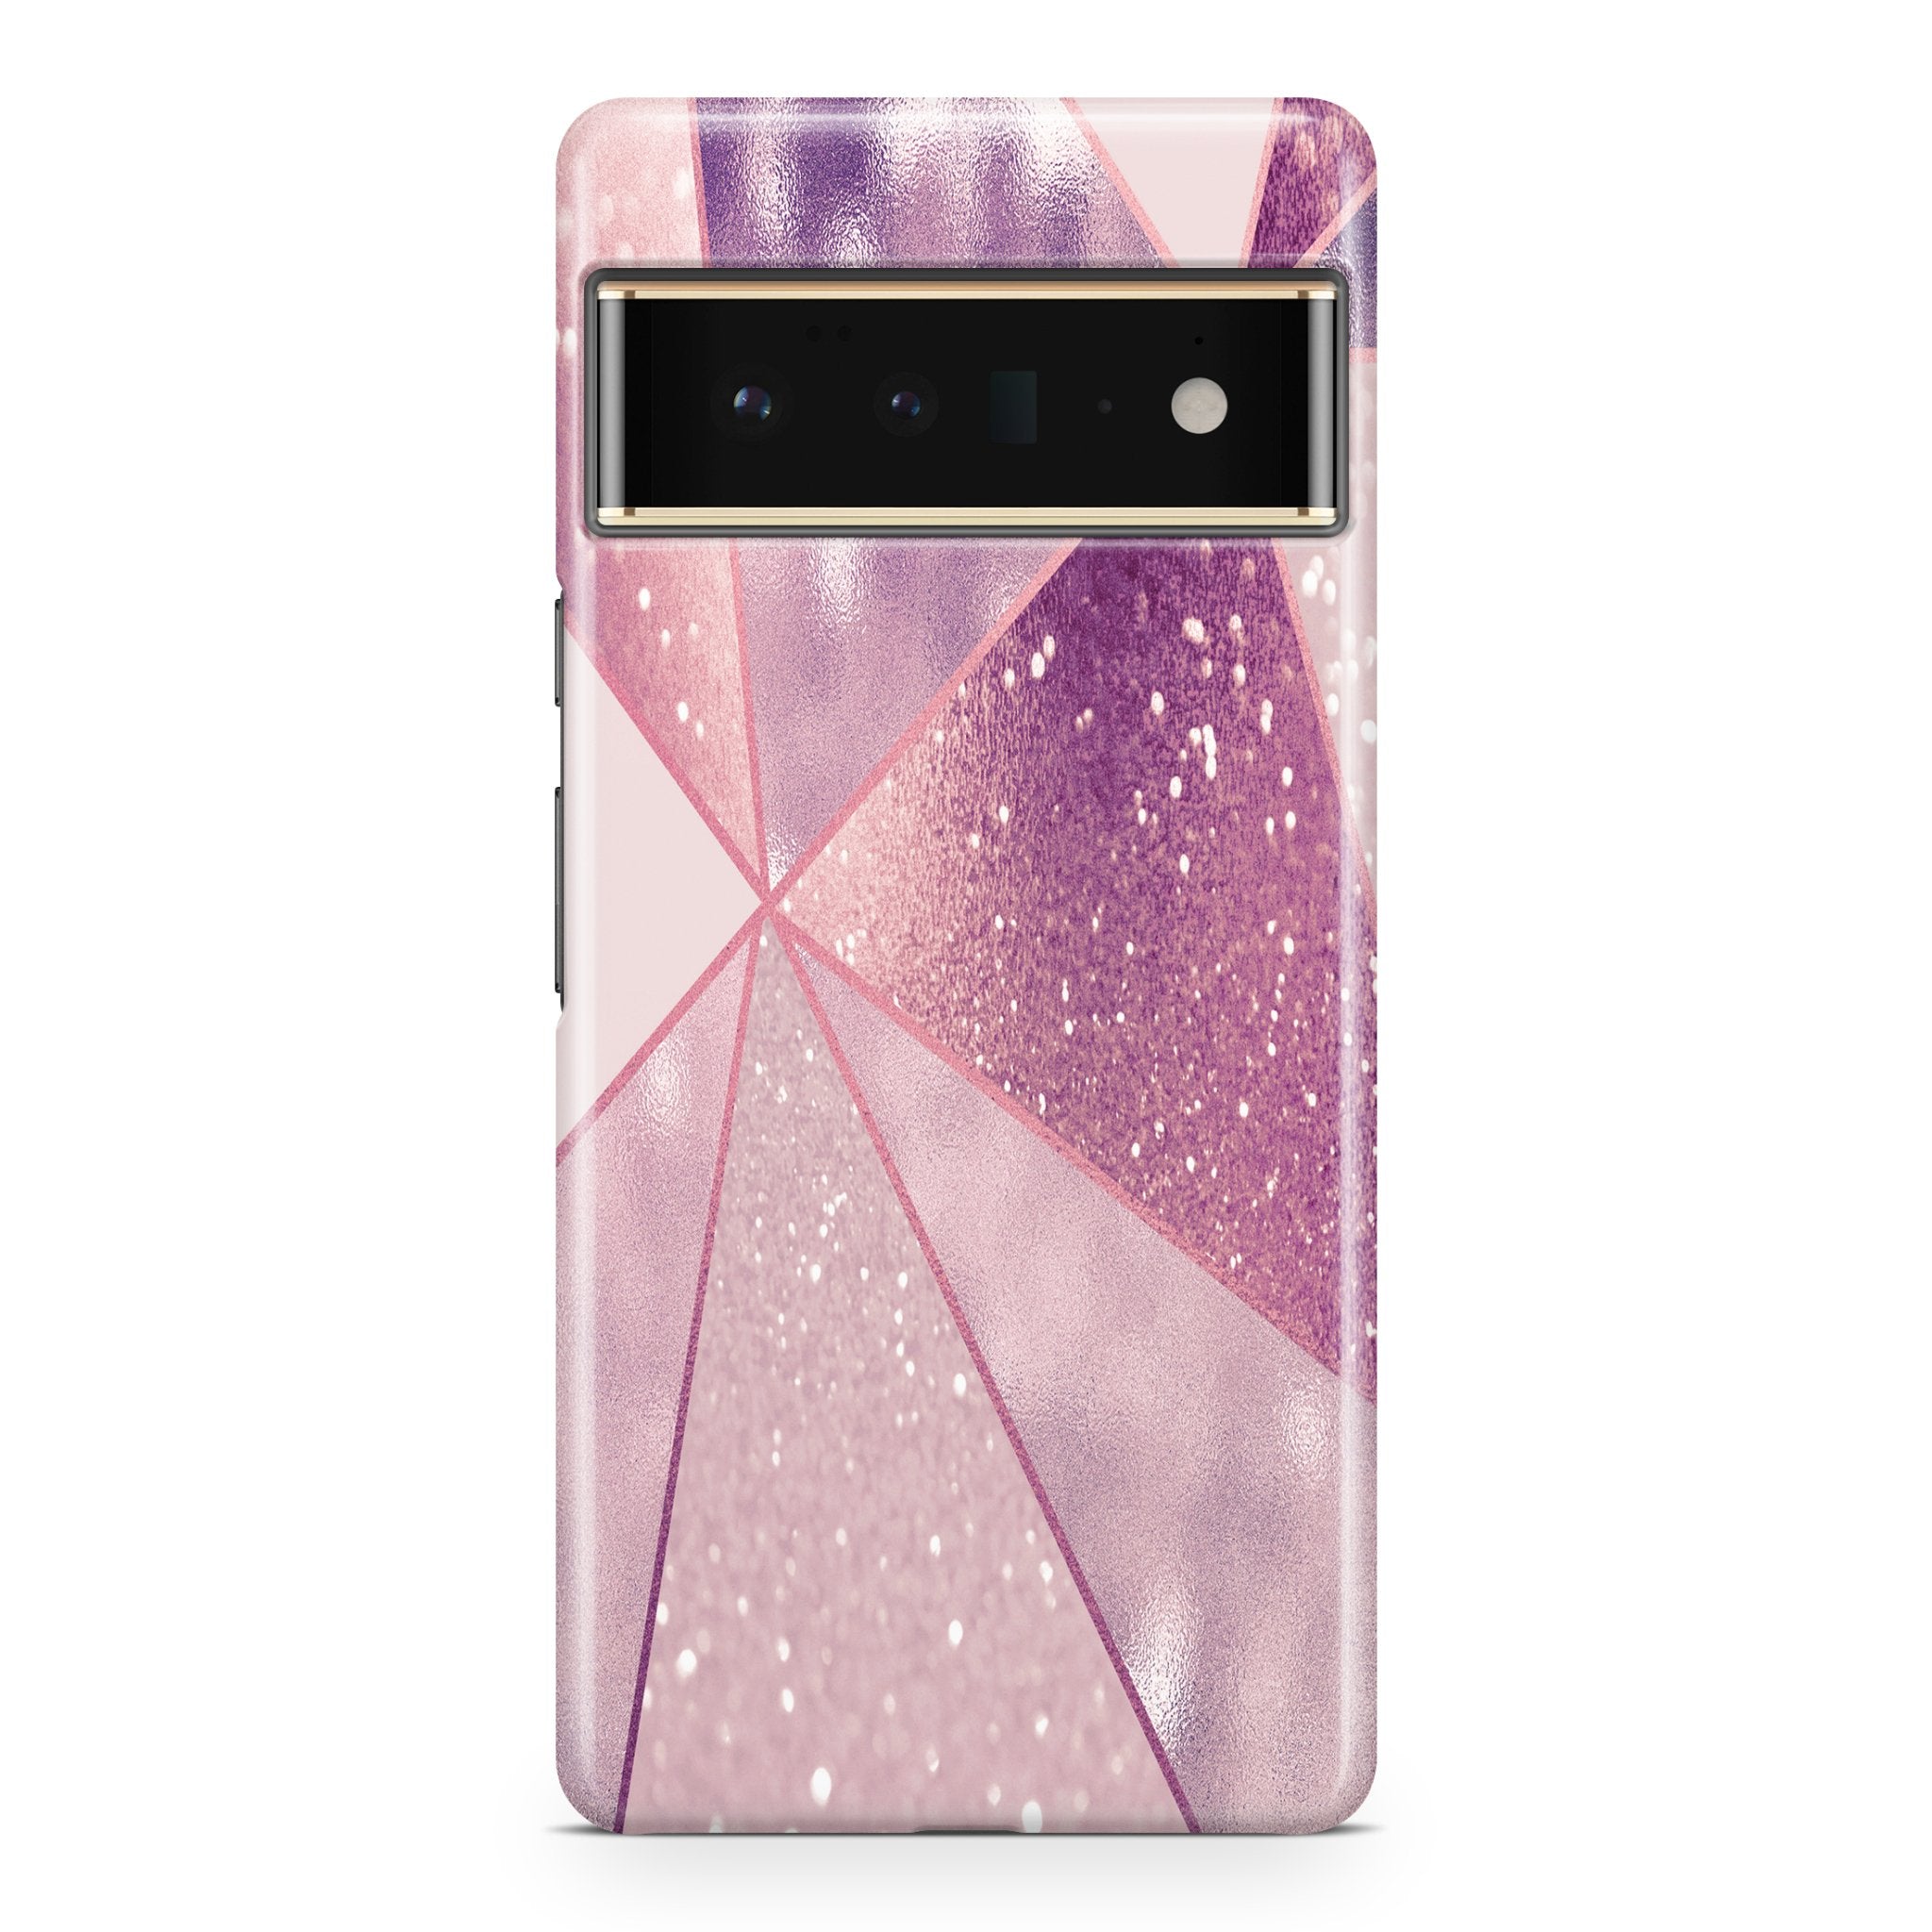 Rose Geometric - Google phone case designs by CaseSwagger